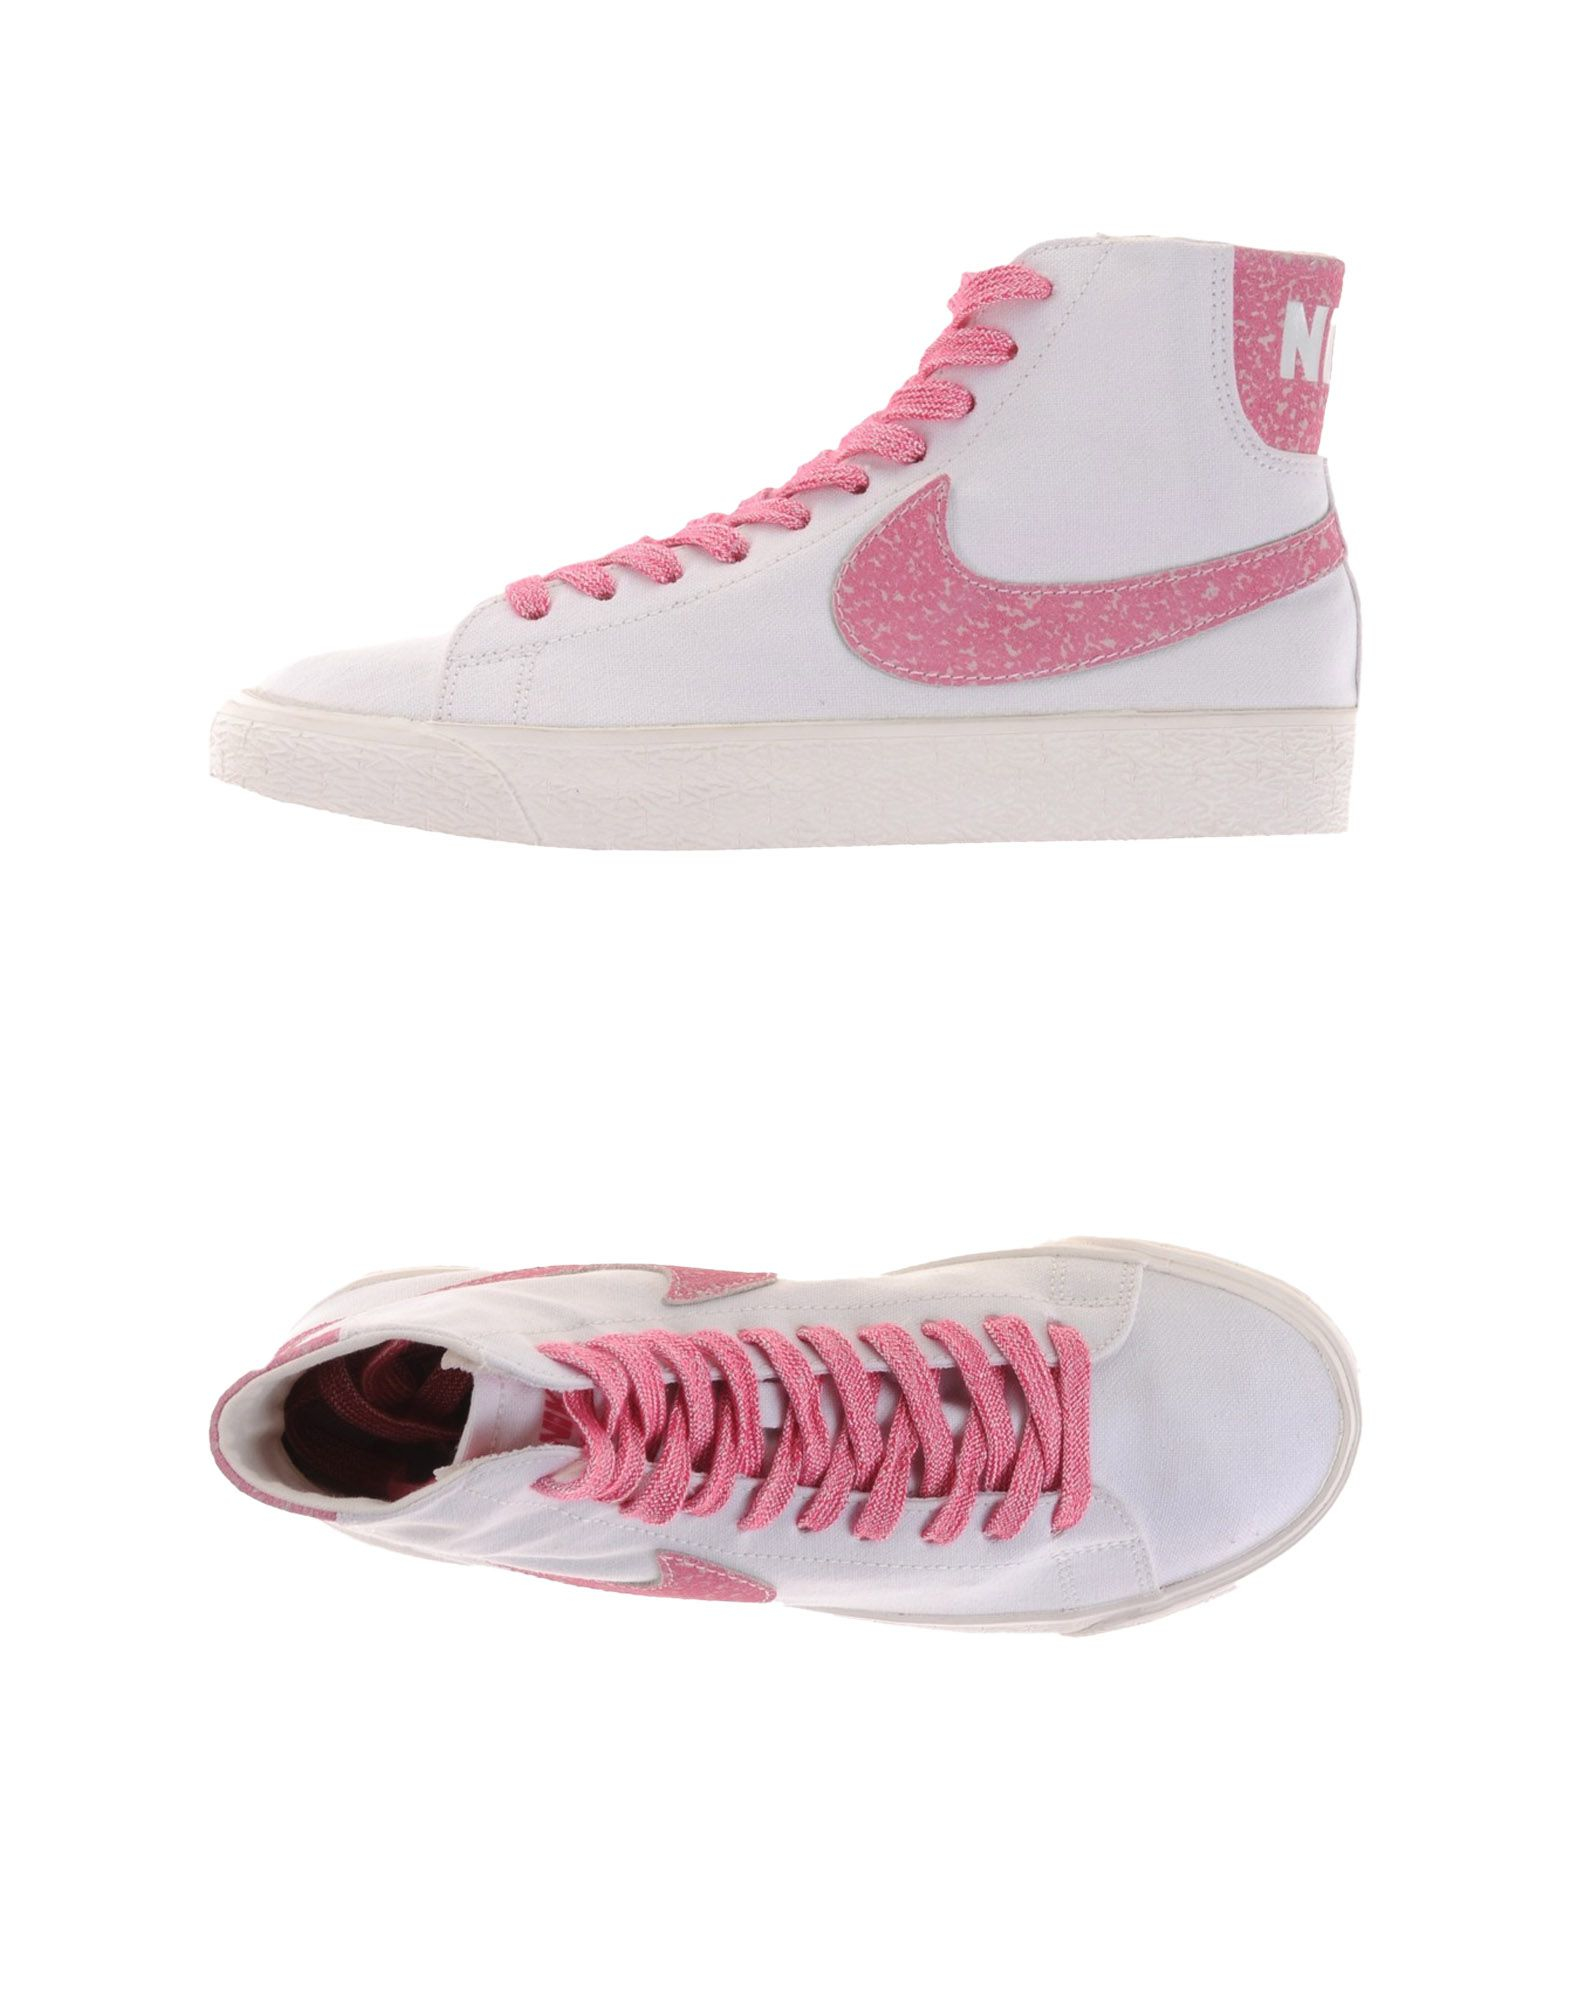 Nike High-tops & Trainers in Natural | Lyst